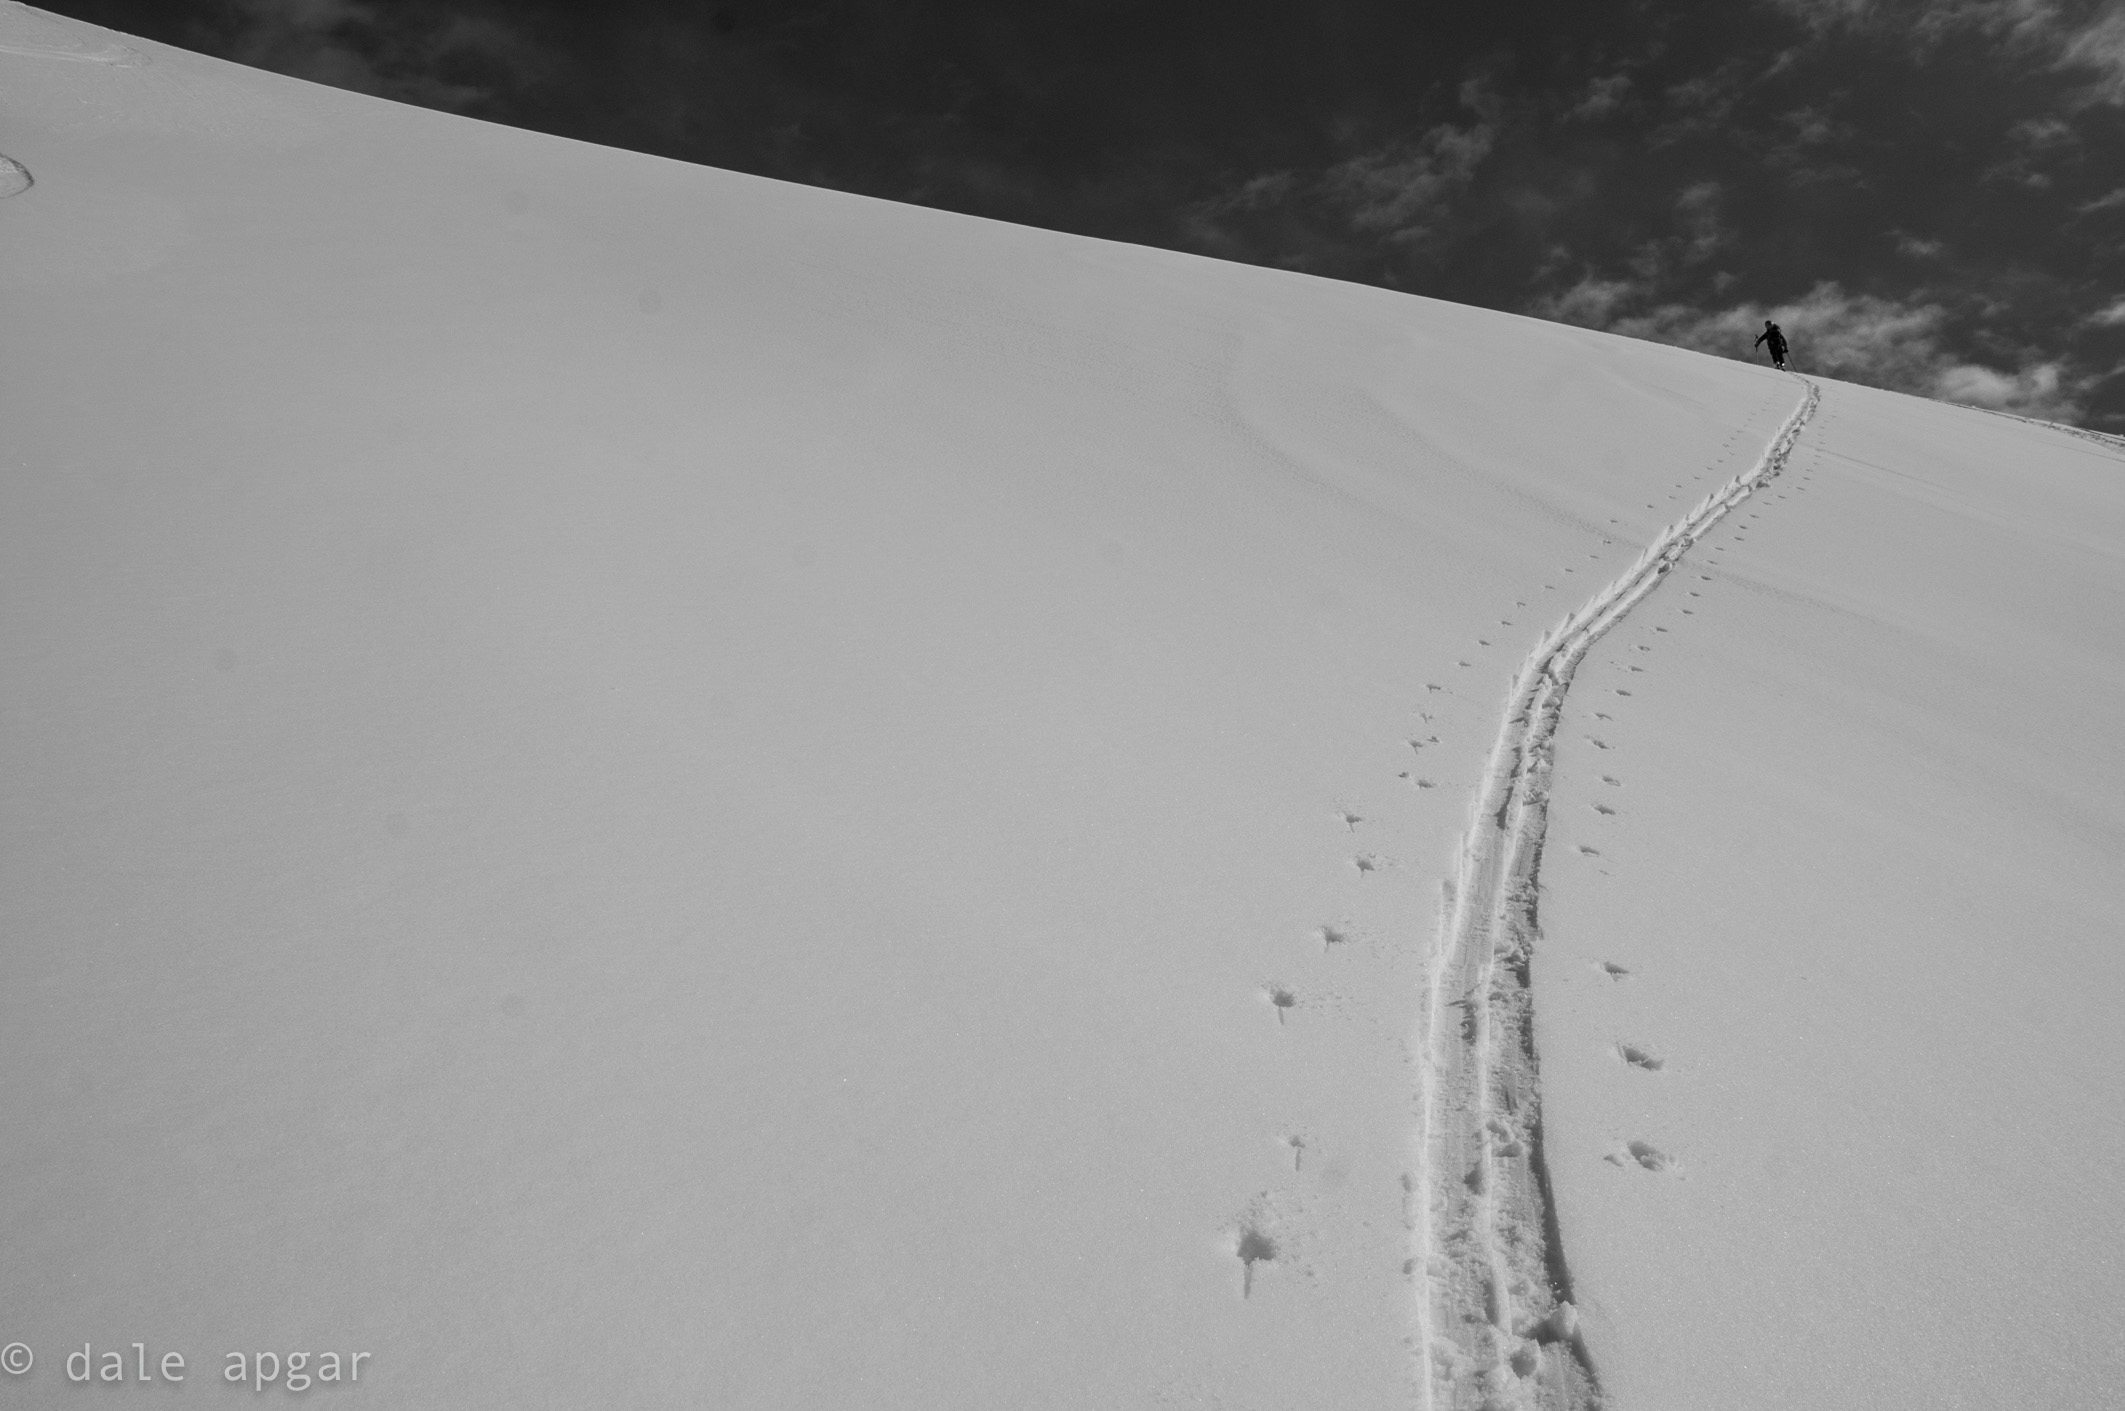  Putting in the skin track in the Chugach backcountry 